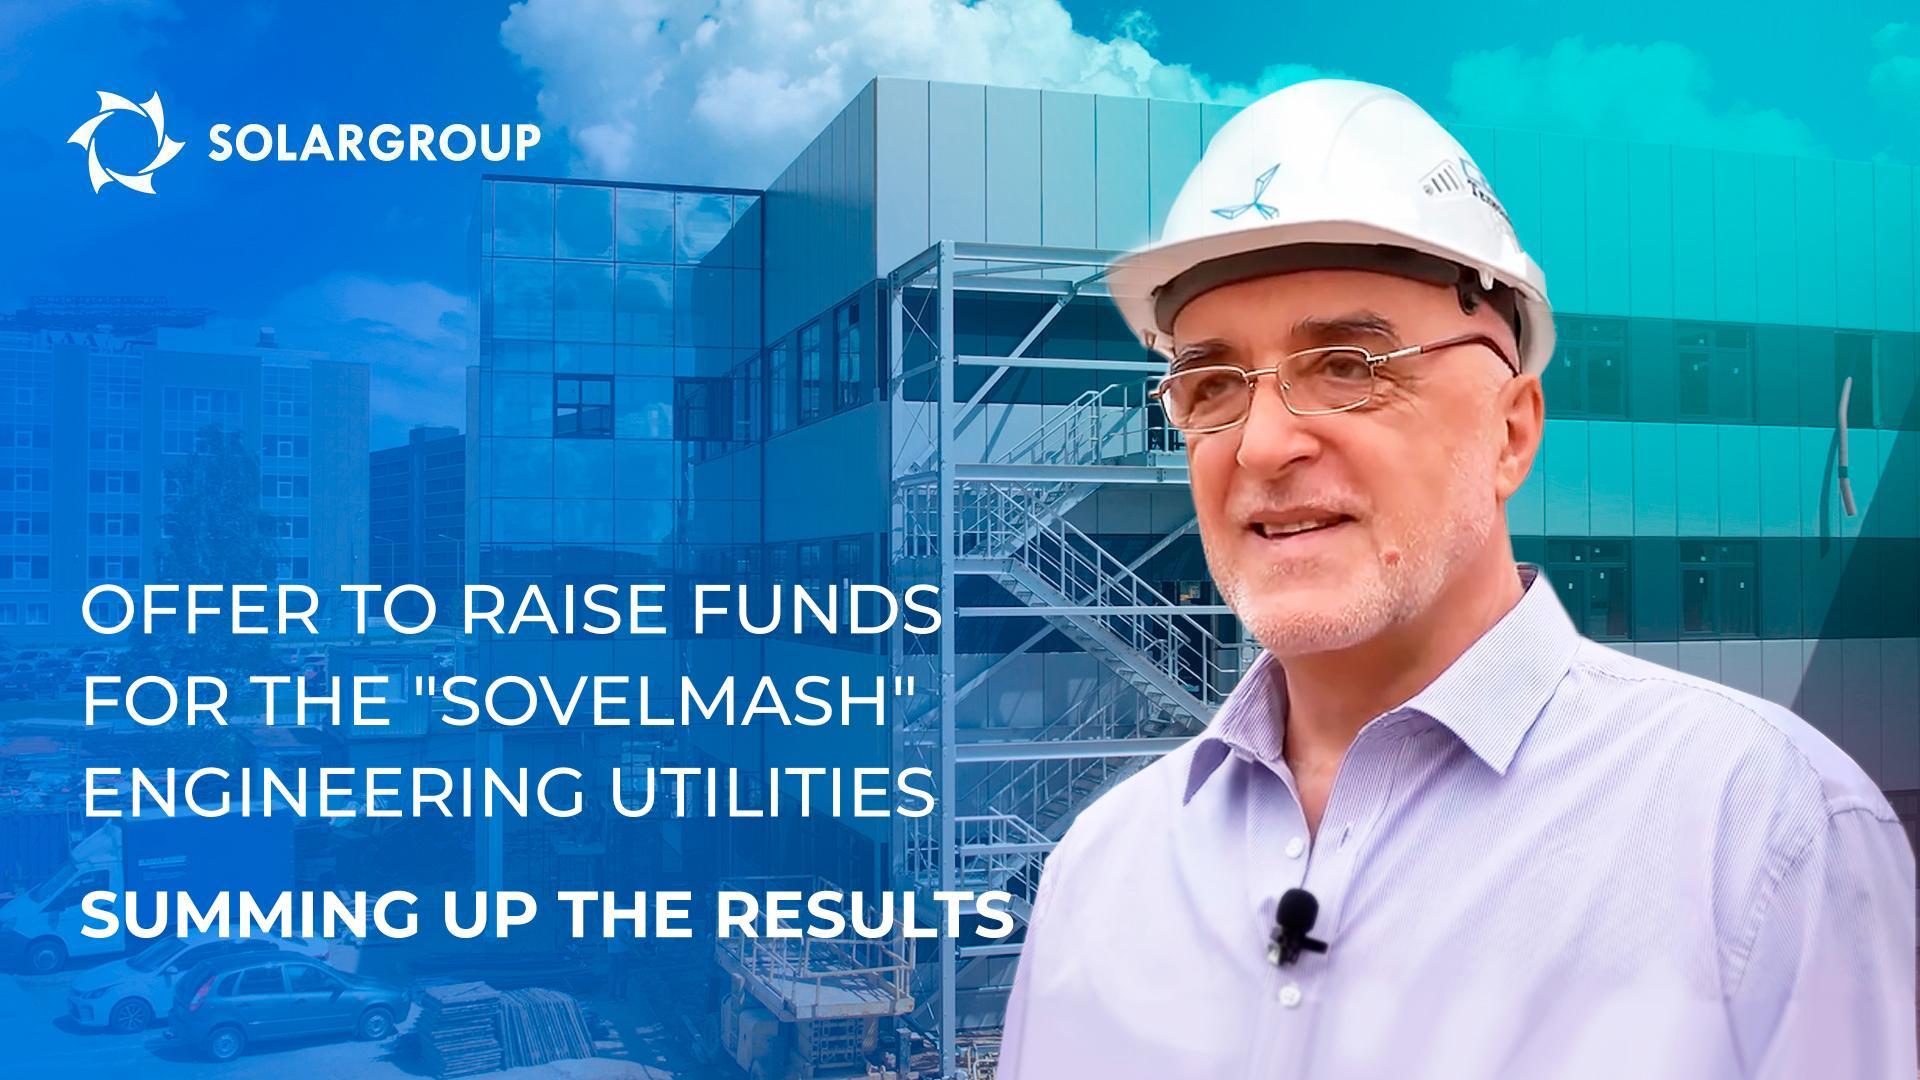 Fundraising offer for the "Sovelmash" engineering utilities: summing up the results